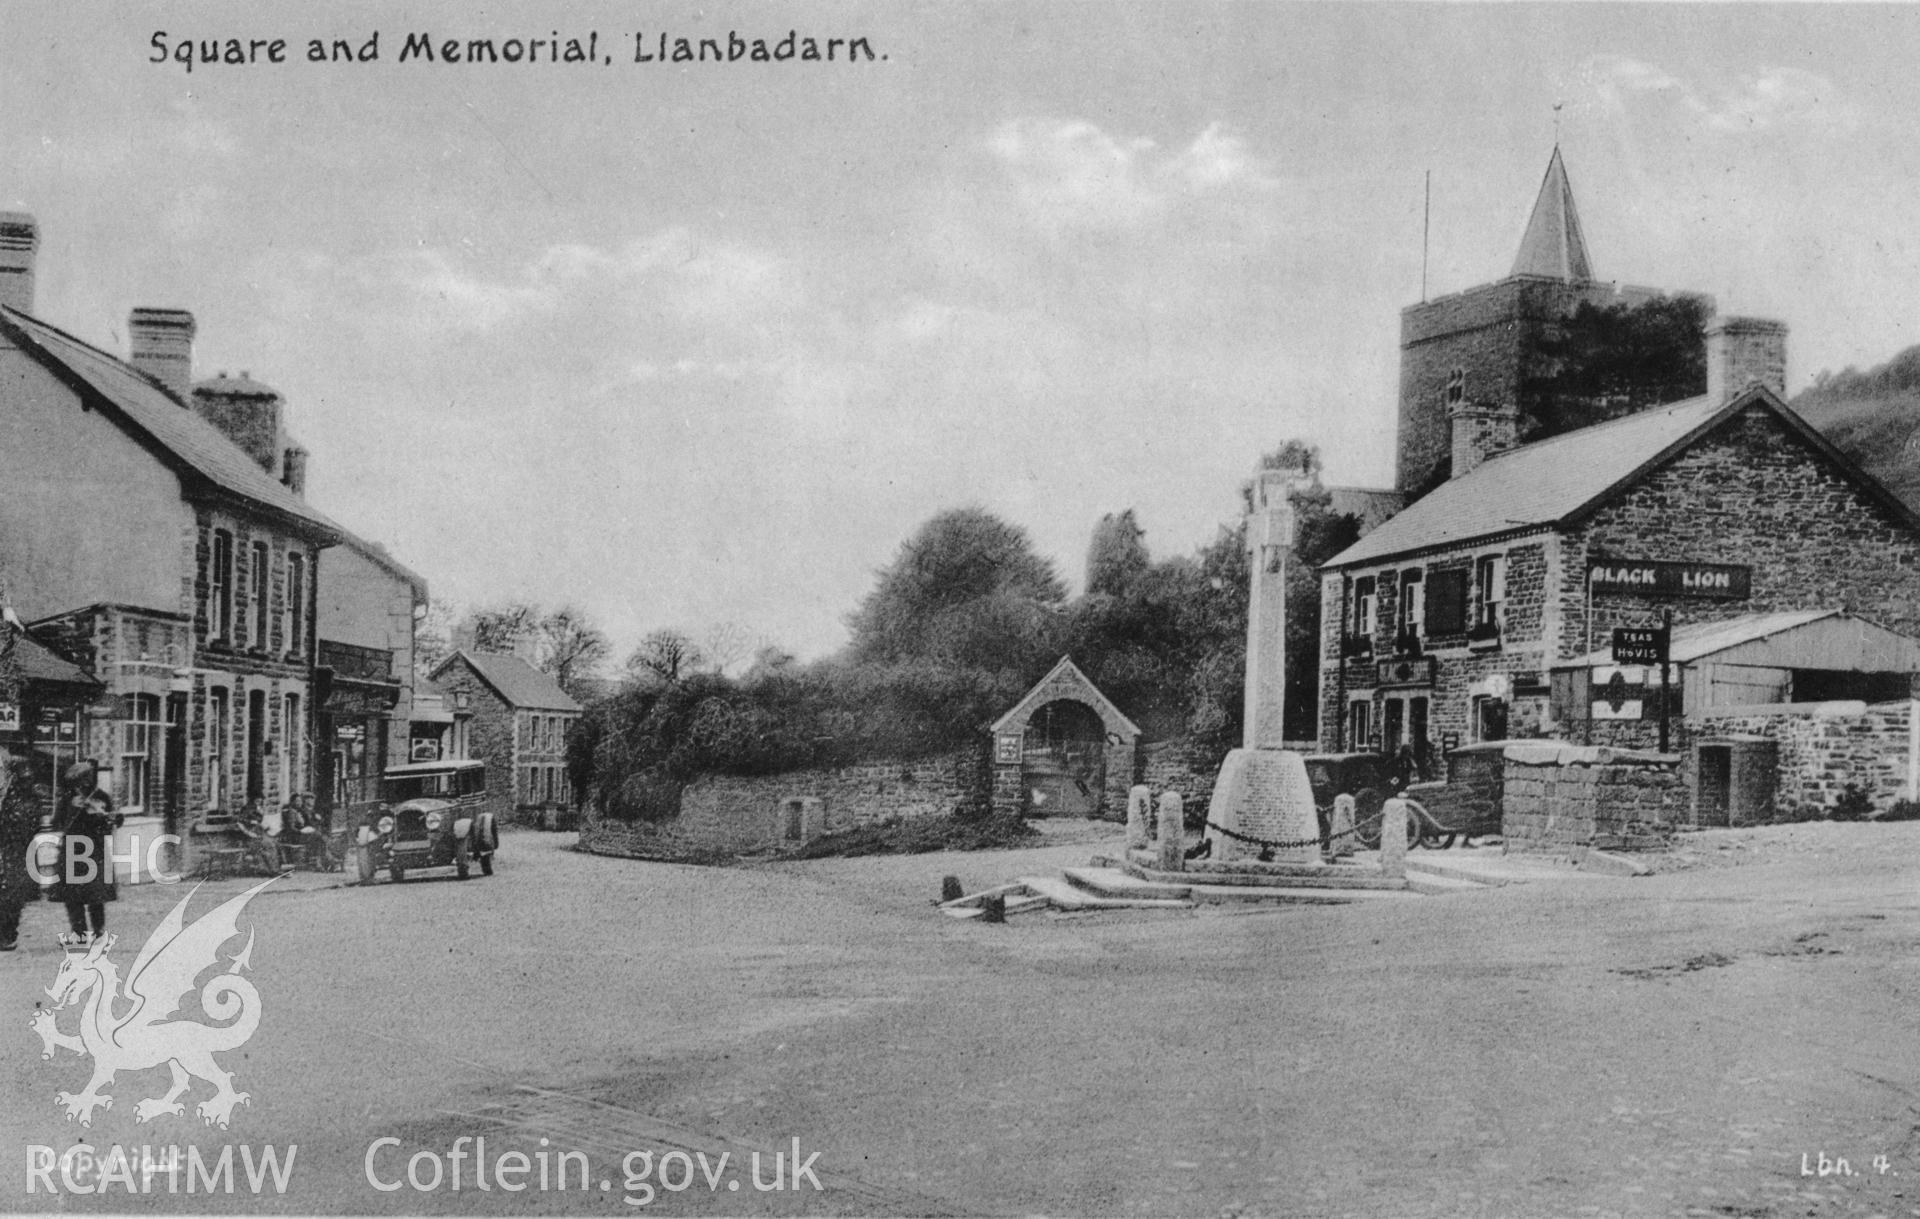 Digital copy of postcard showing Square and War Memorial, Llanbadarn, dated c. 1932 (Publisher: Lilywight).  Loaned for copying by Charlie Downes